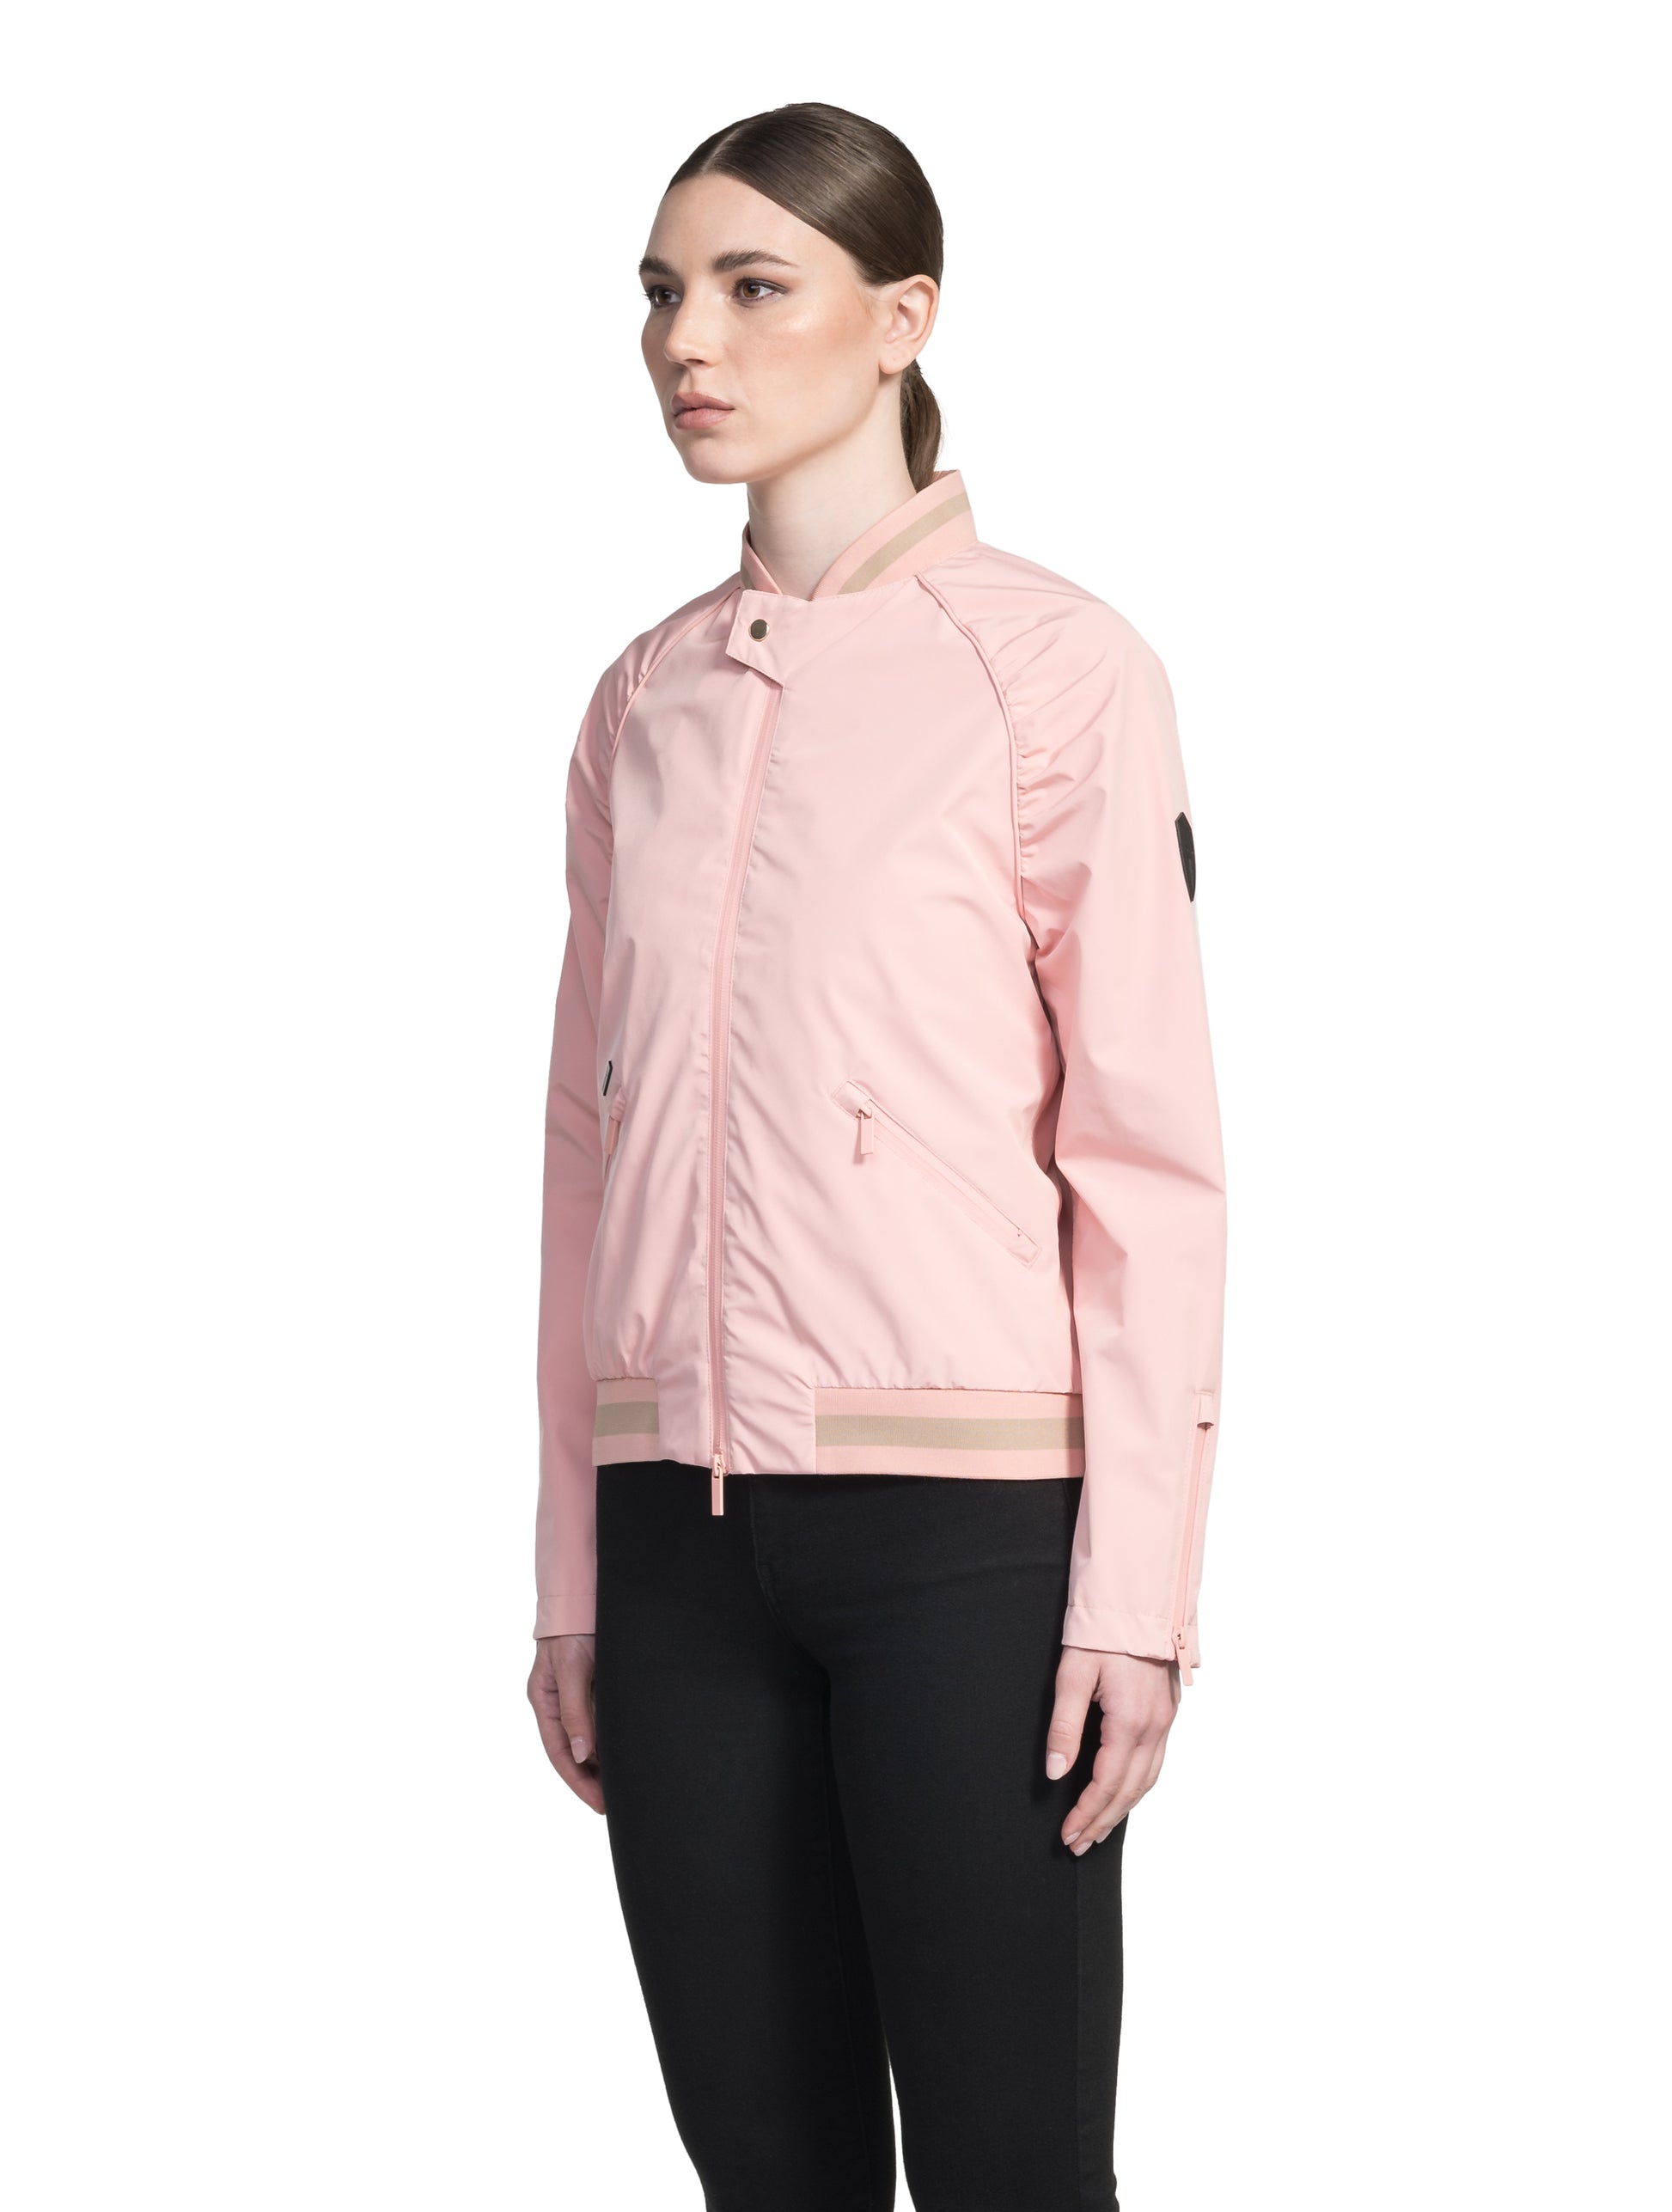 Women's classic bomber jacket called Phoebe in Shell Pink